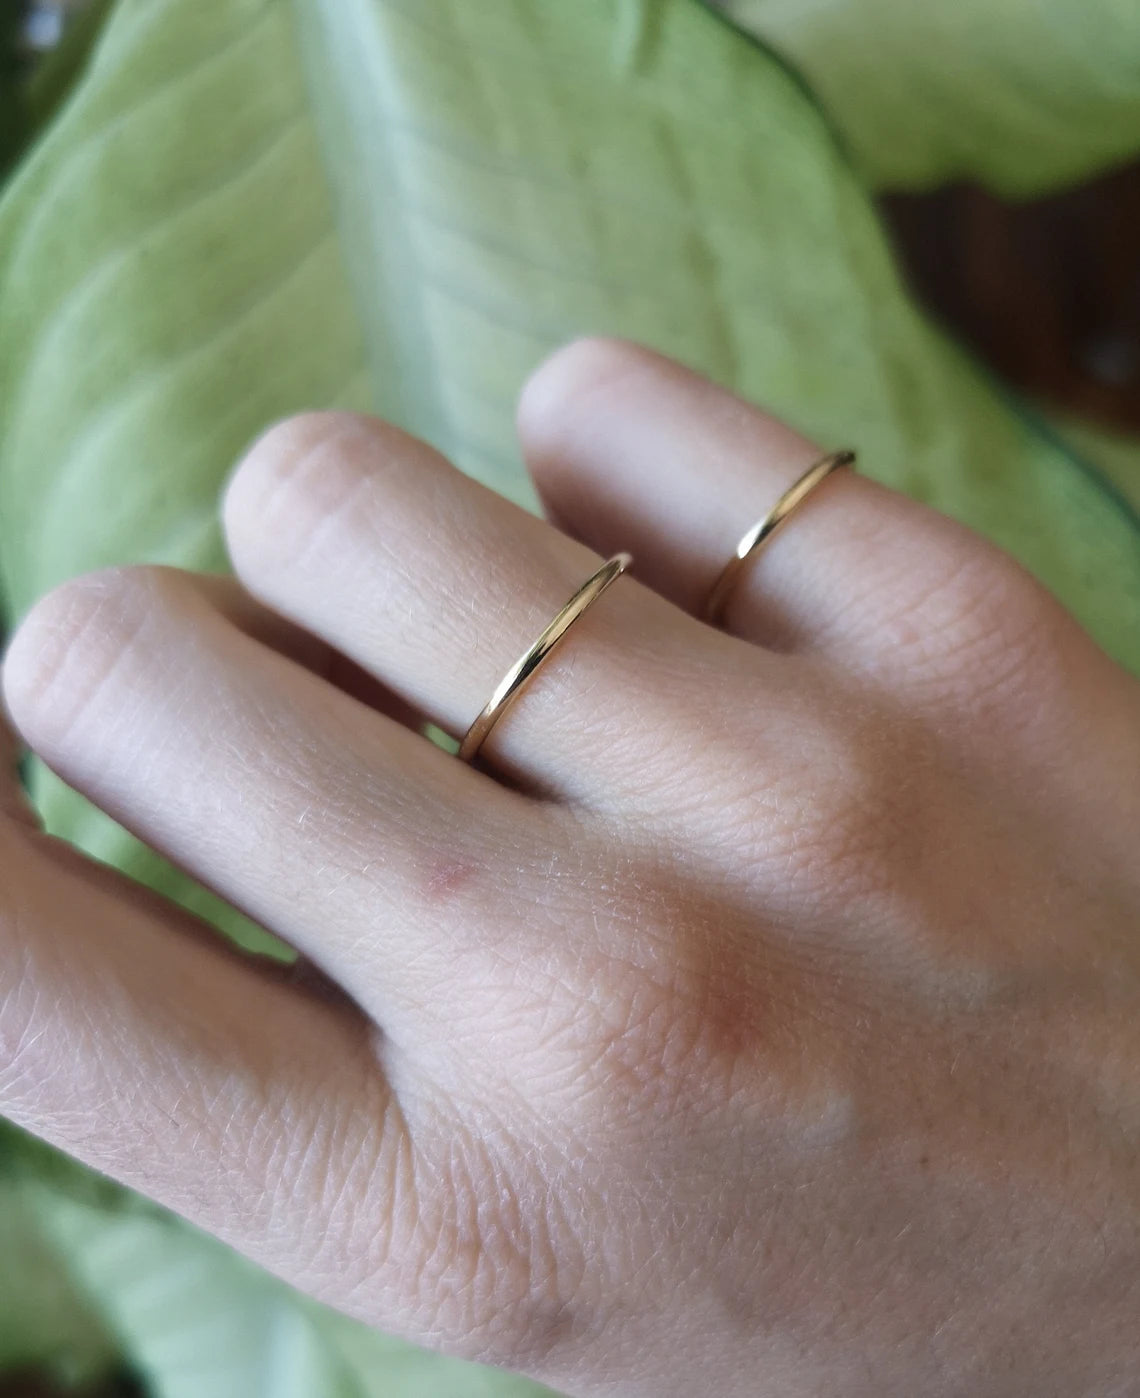 Ring - 1.6mm gold band - 10K yellow gold